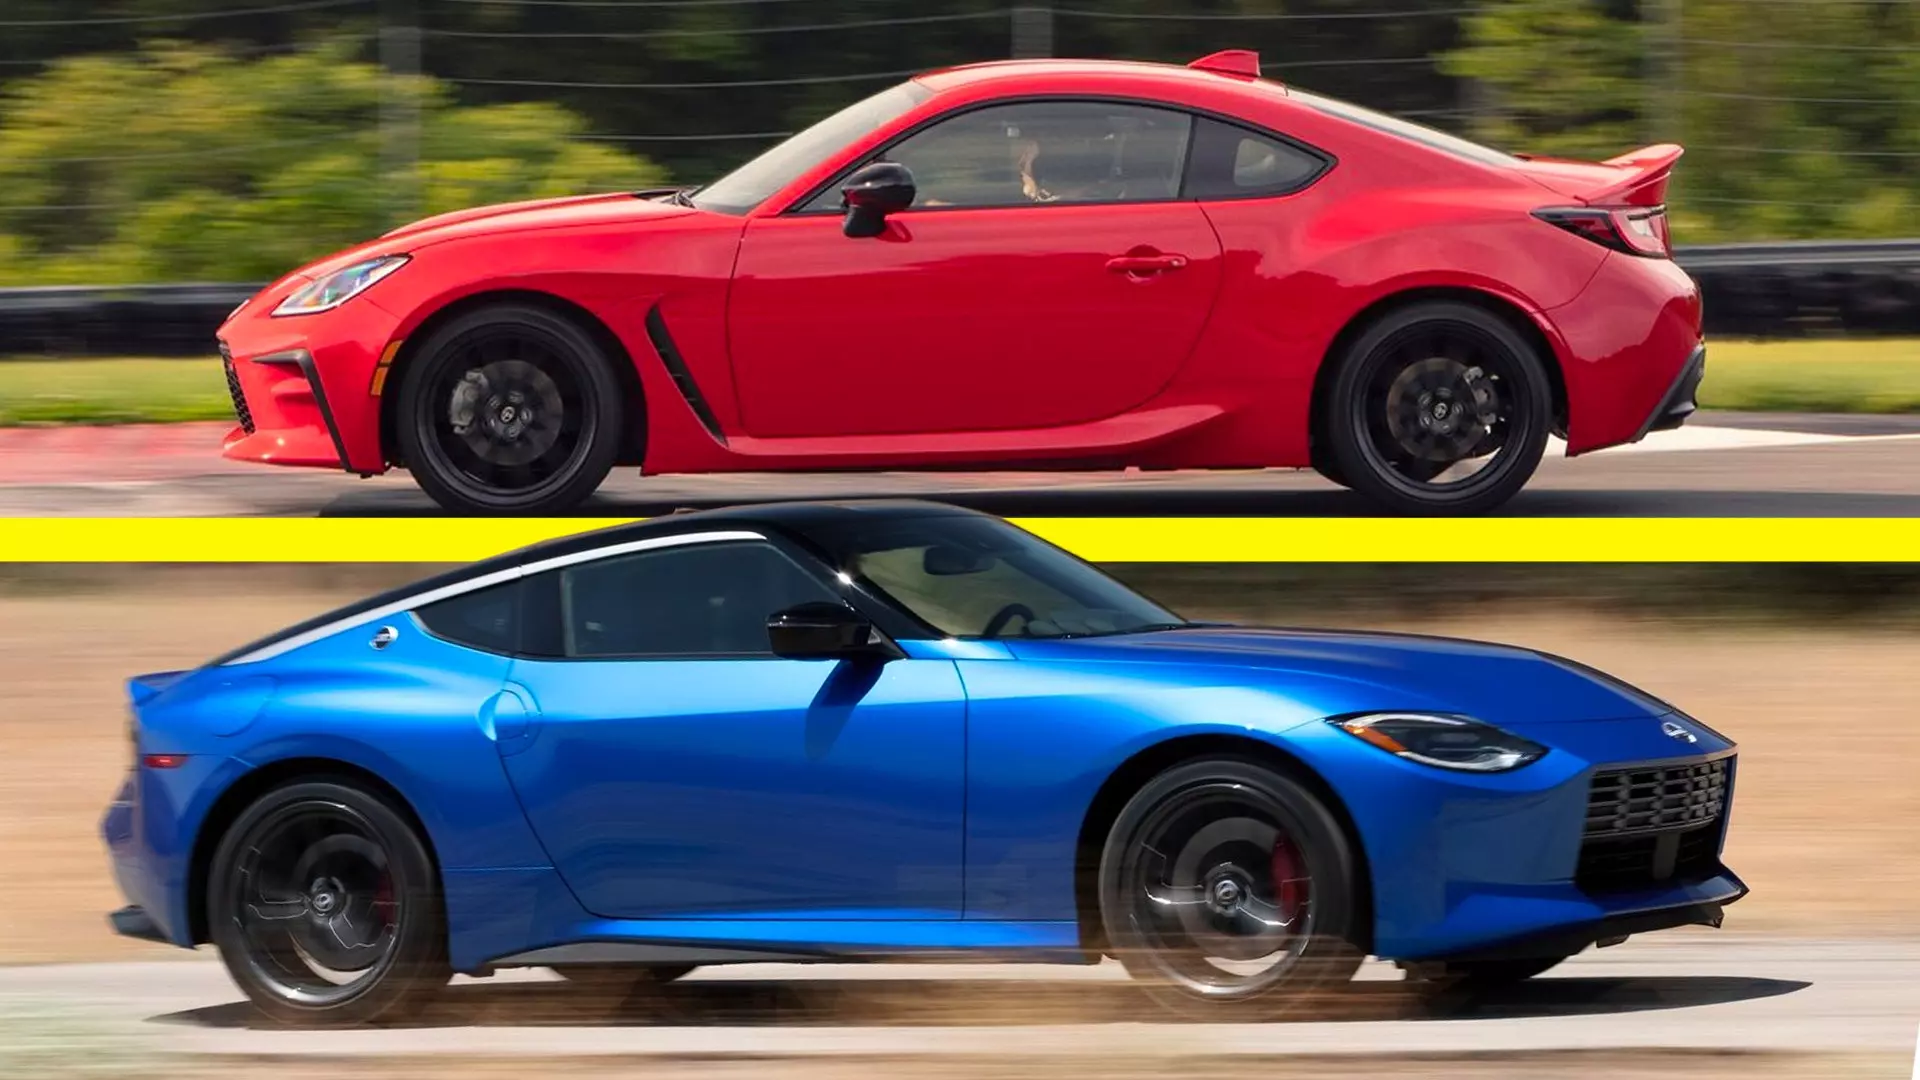 Let’s Chat: Nissan Z or Toyota GR 86? | Autance